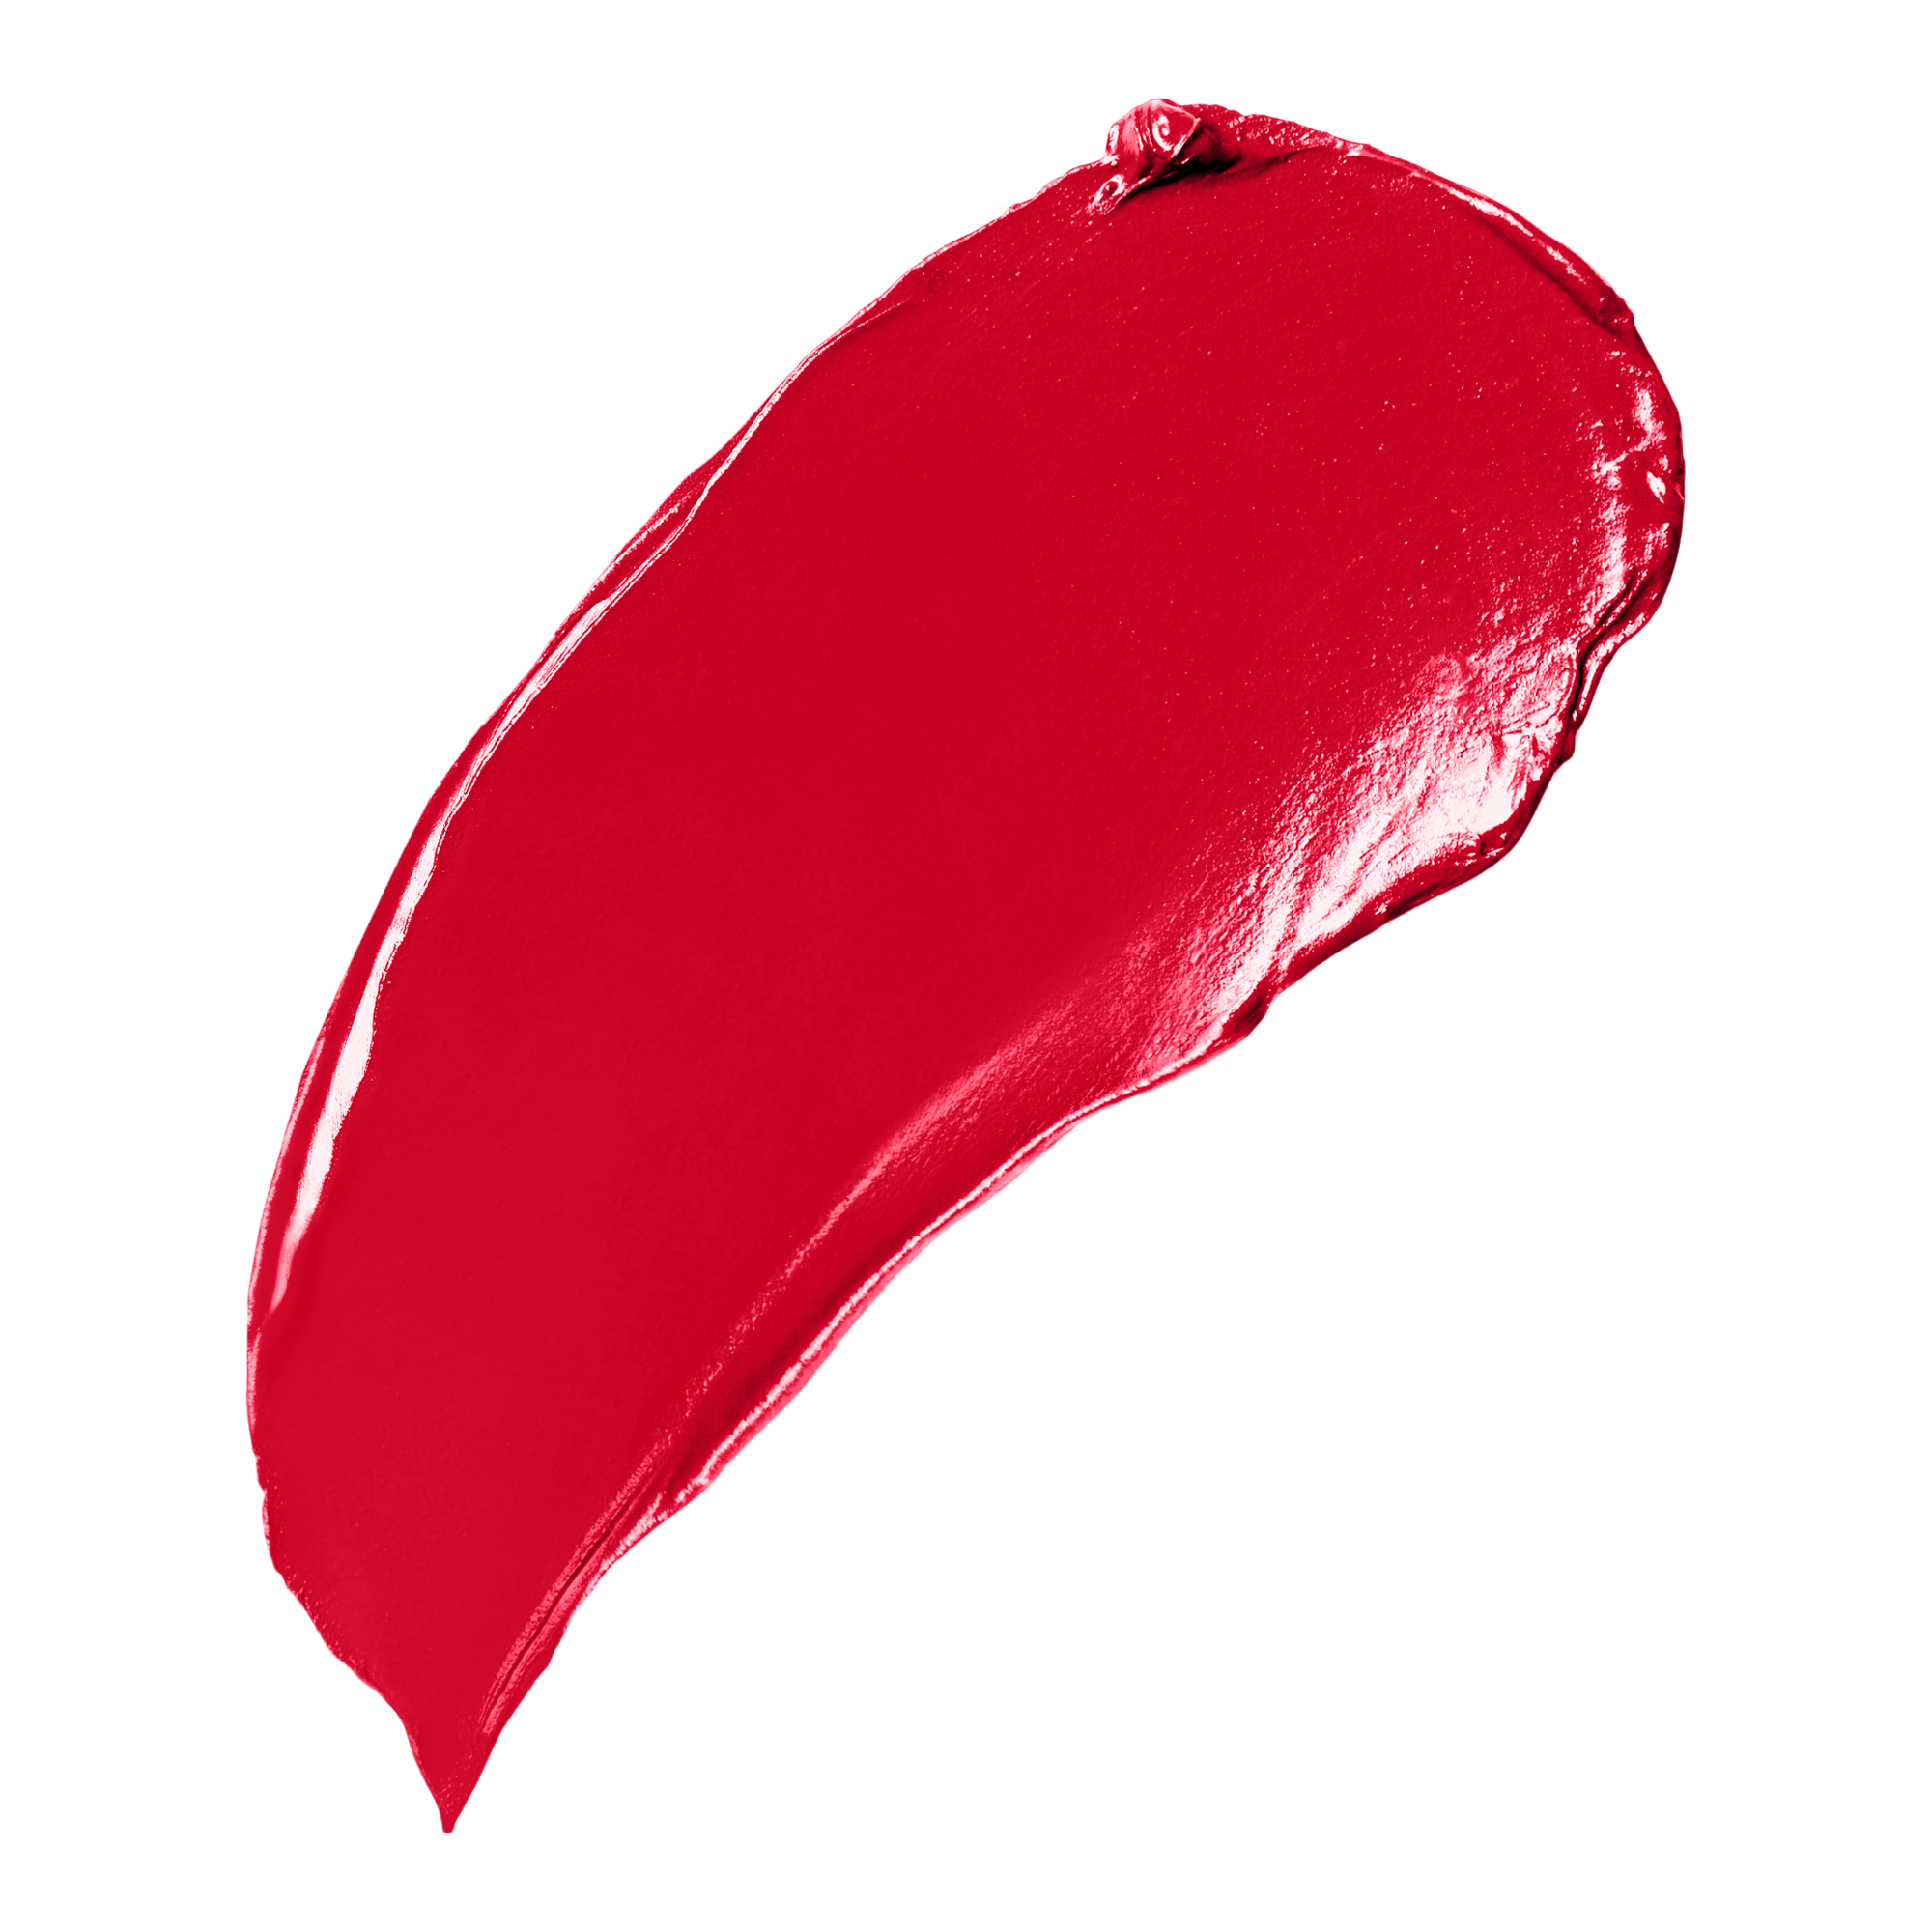 Buxom Full-On Plumping Lipstick Satin / Red My Lips / Swatch